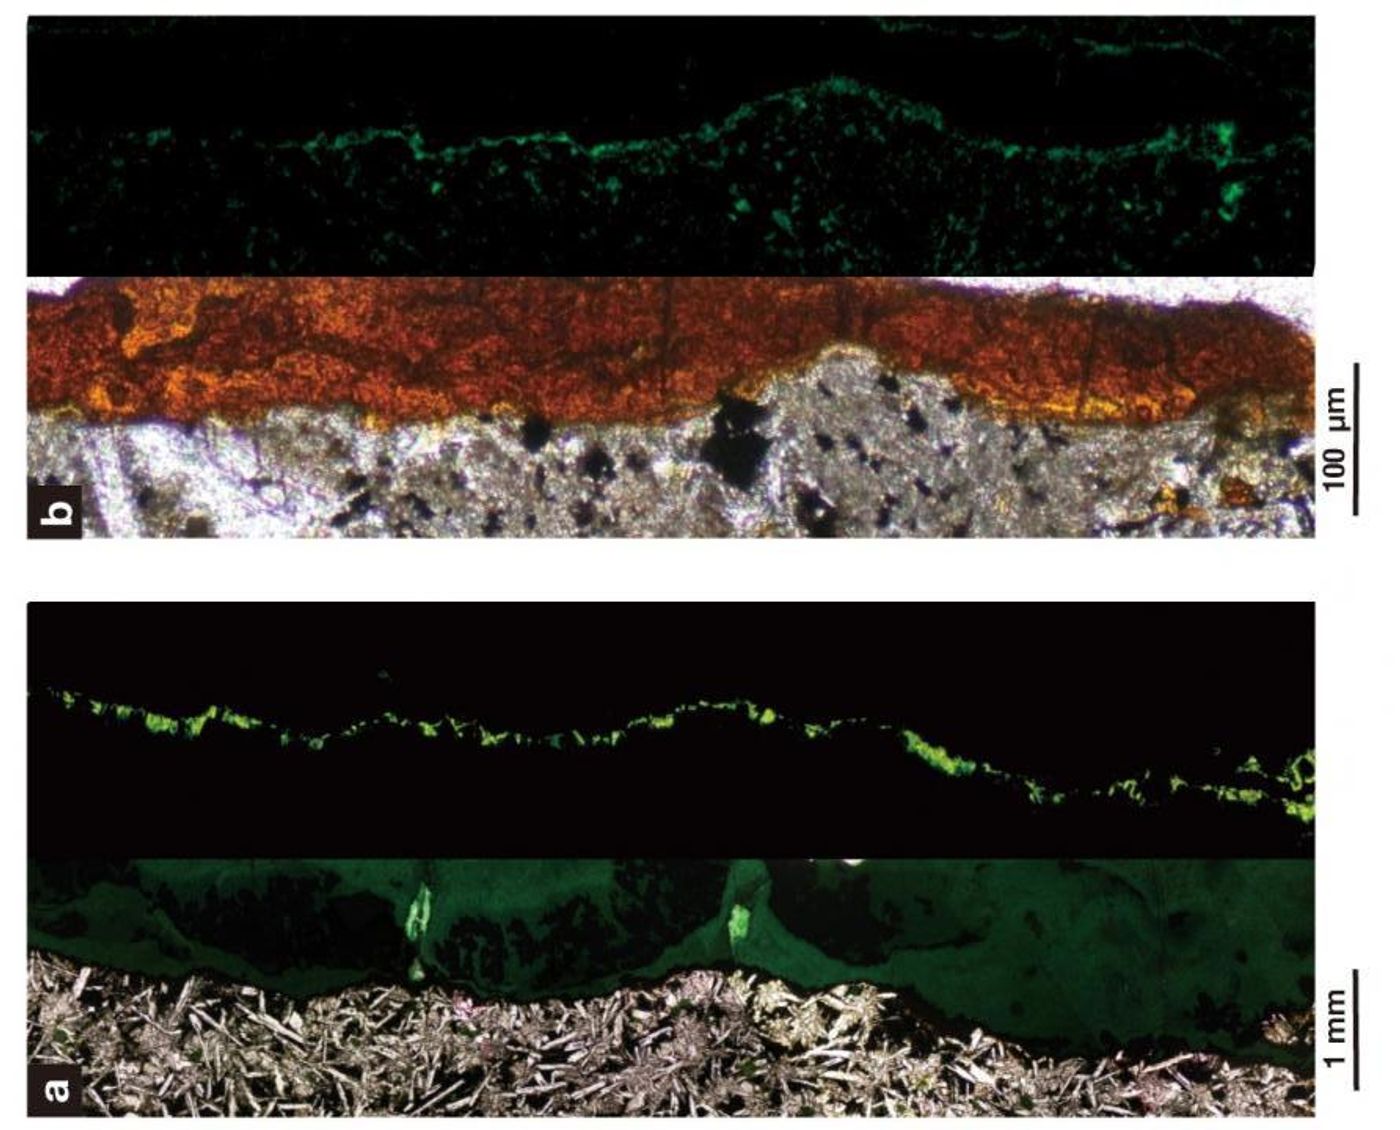 Dense colonies of aerobic bacteria live in tunnels of clay minerals within solid rock 122 m beneath the seafloor. (B is 1,000x greater magnification than A). Top, normal illumination; bottom, fluorescent. Solid basalt rock (gray), clay minerals (orange), bacterial cells (green). / Credit: Suzuki et al. 2020, DOI: 10.1038/s42003-020-0860-1, CC BY 4.0